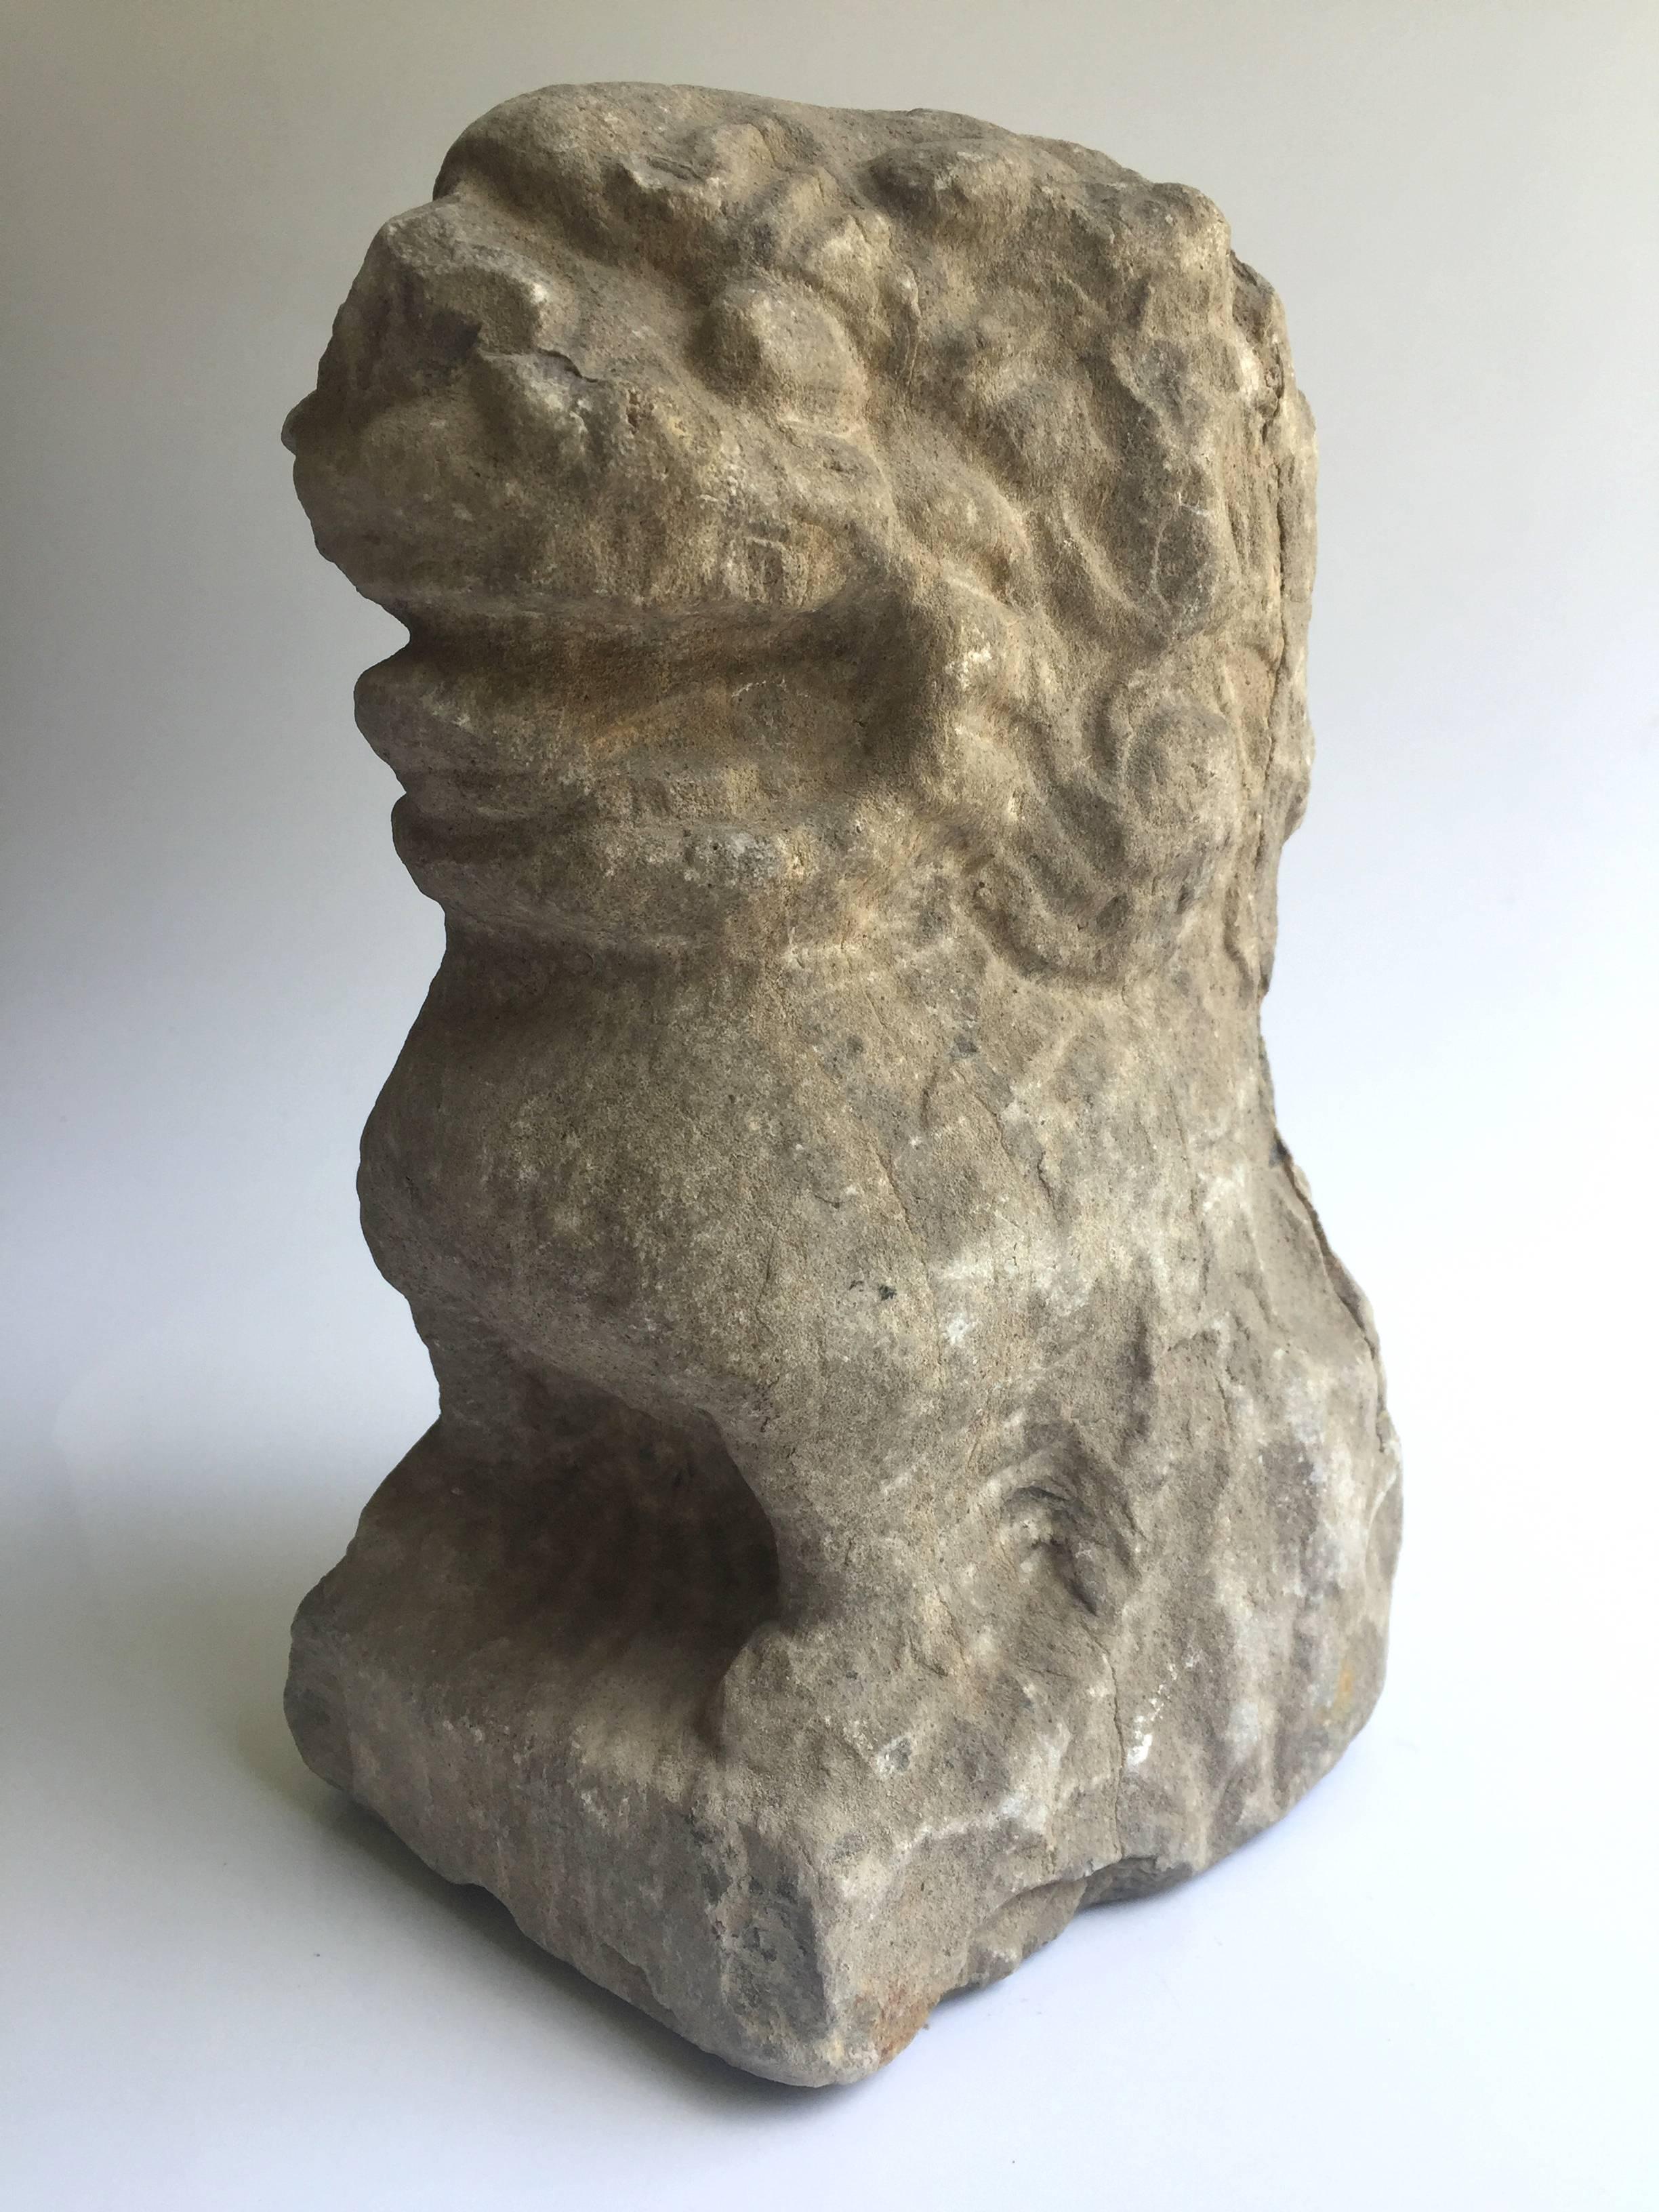 This stone foo dog is a wonderful treasure. Completely originally, this is an old piece from a private garden in northern China. It has a young and adorable expression, with his mouth wide open, giving a toothy grin. All patina natural to the piece.